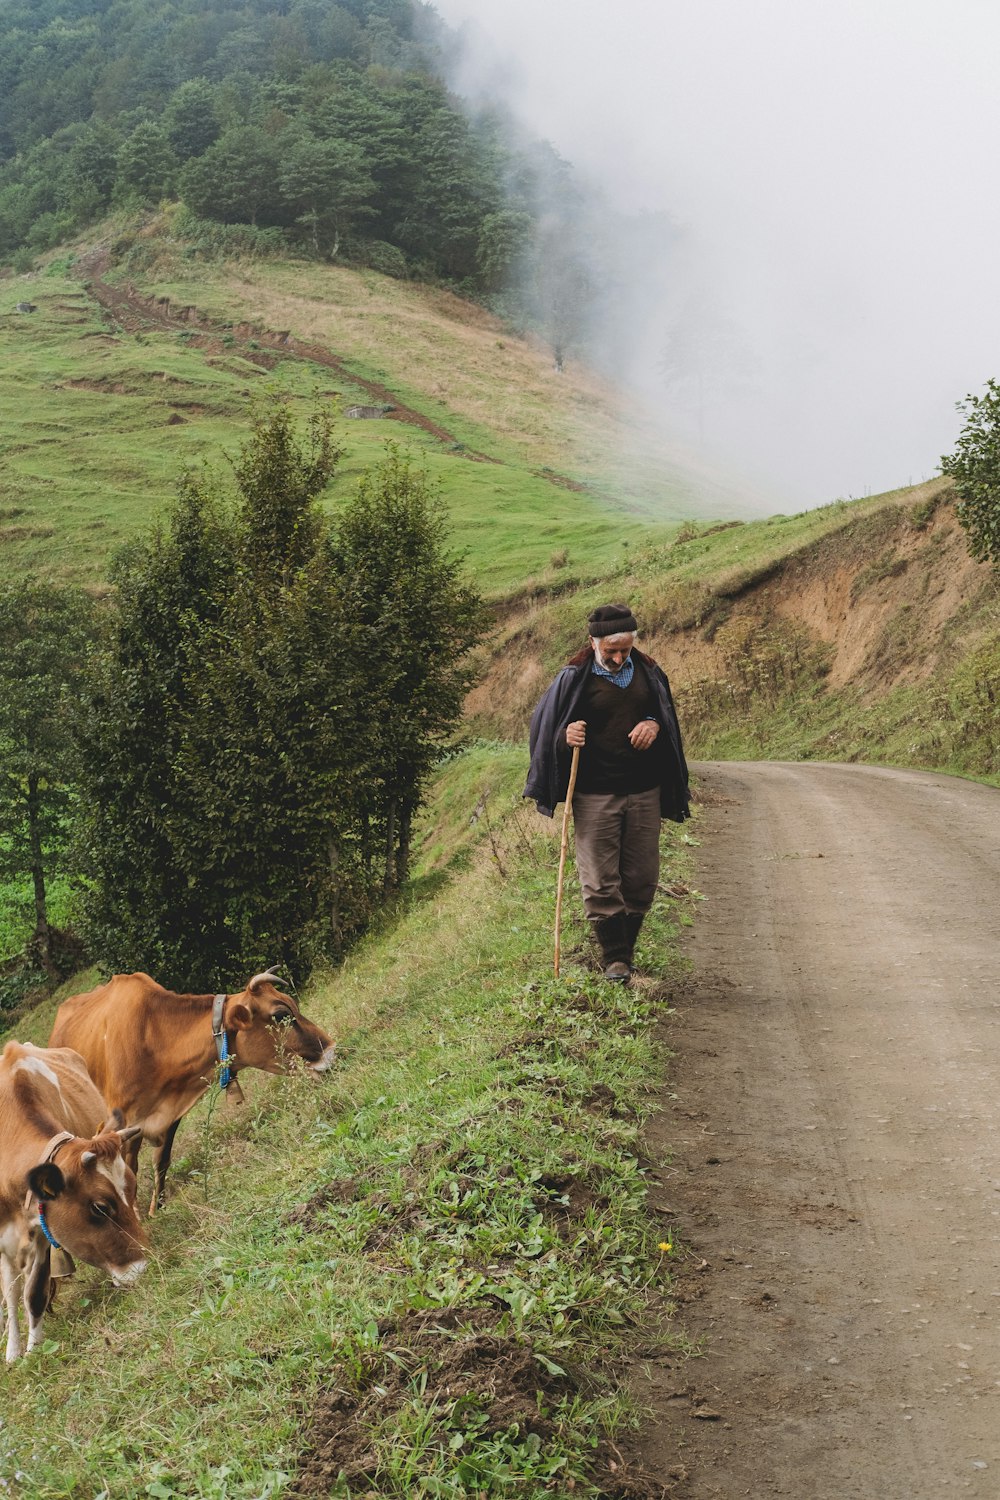 a man walking down a dirt road next to two cows